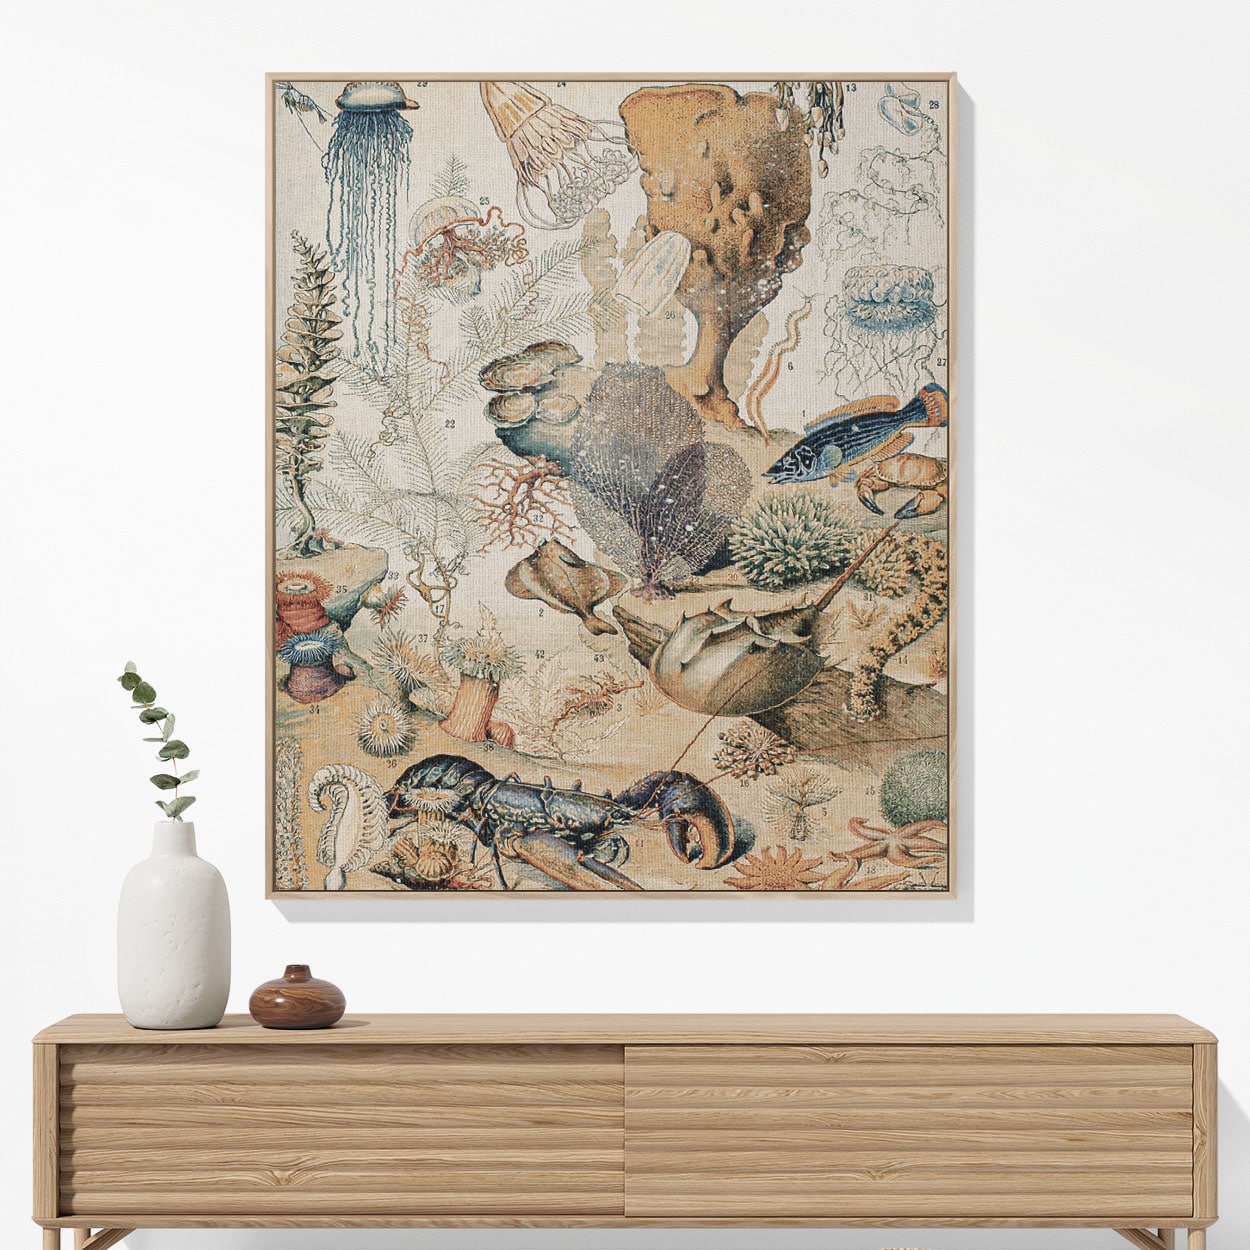 Corals and Jellyfish Woven Blanket Woven Blanket Hanging on a Wall as Framed Wall Art